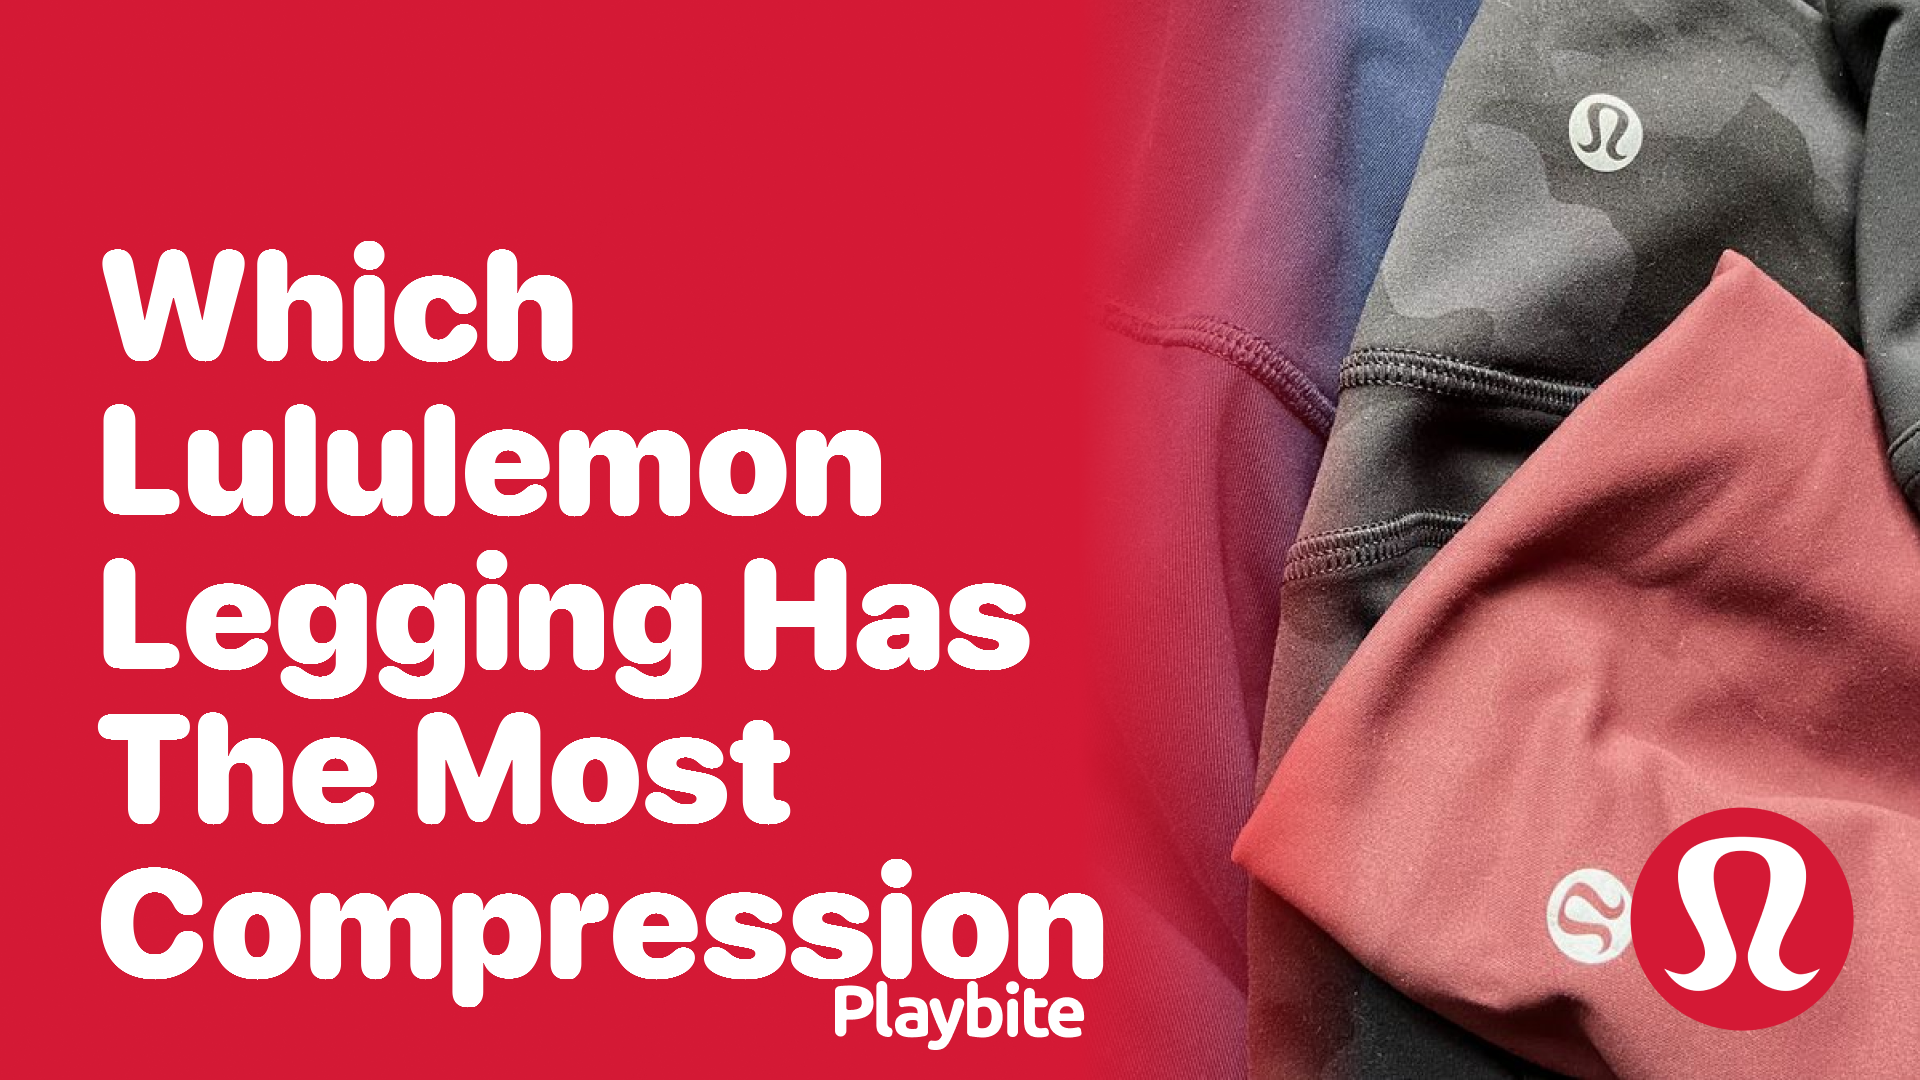 Which Lululemon Legging Has the Most Compression? - Playbite